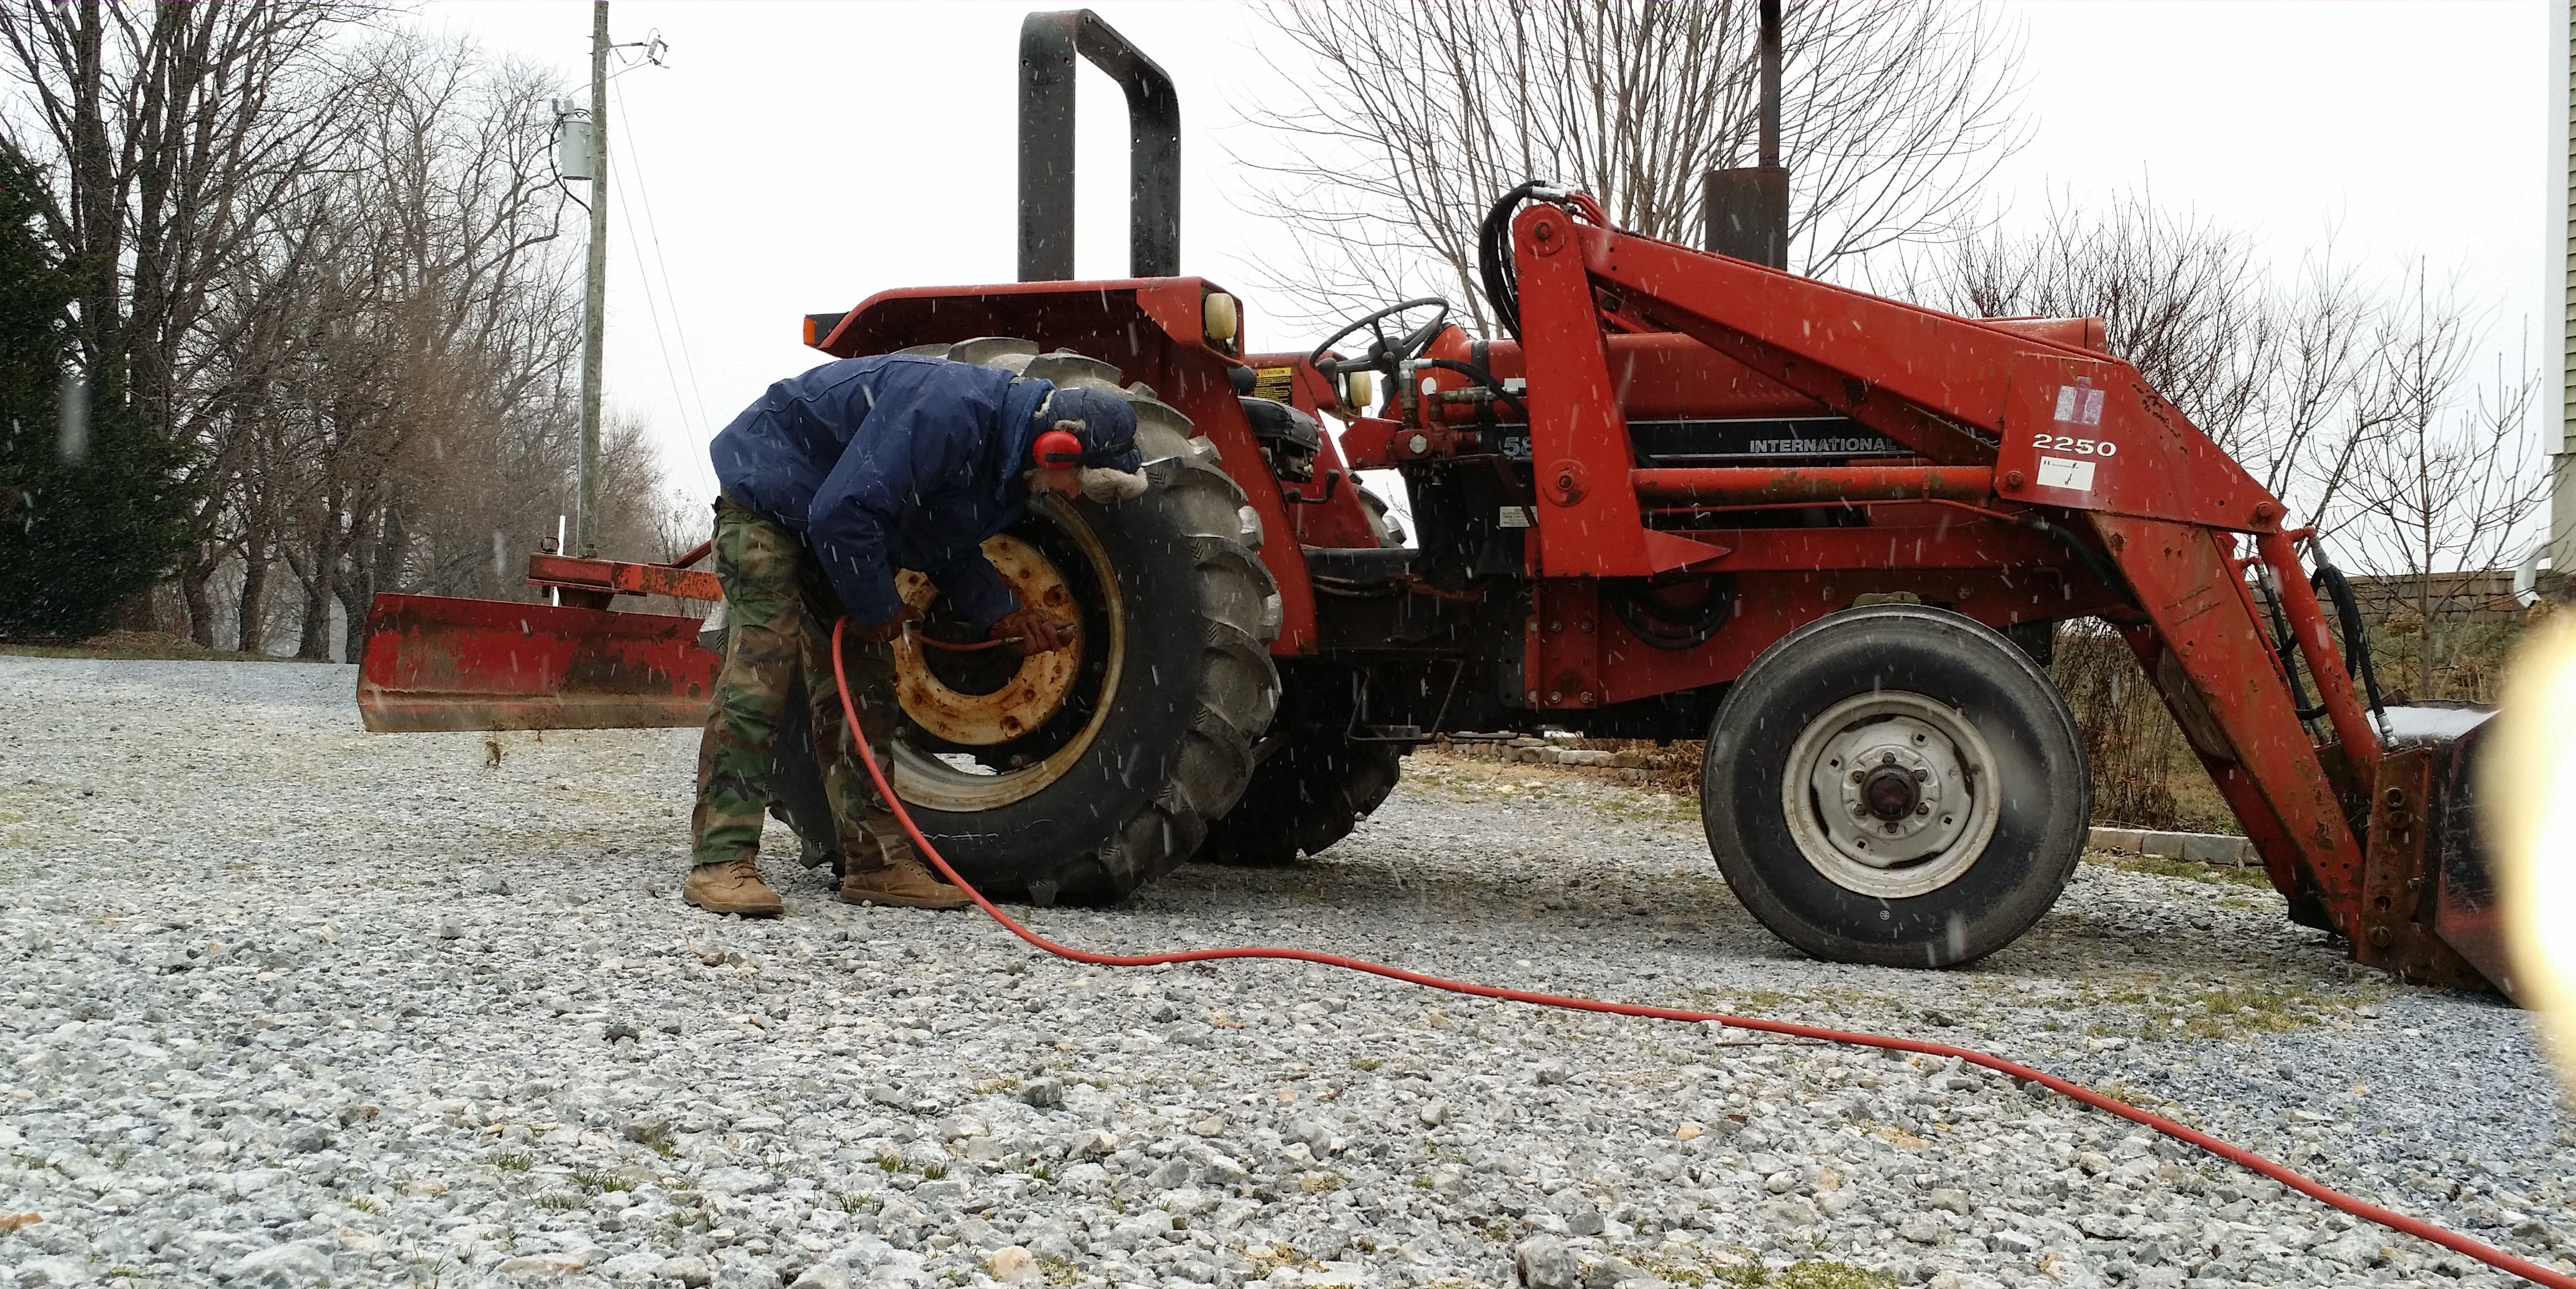 Pat preparing the tractor before a snow storm